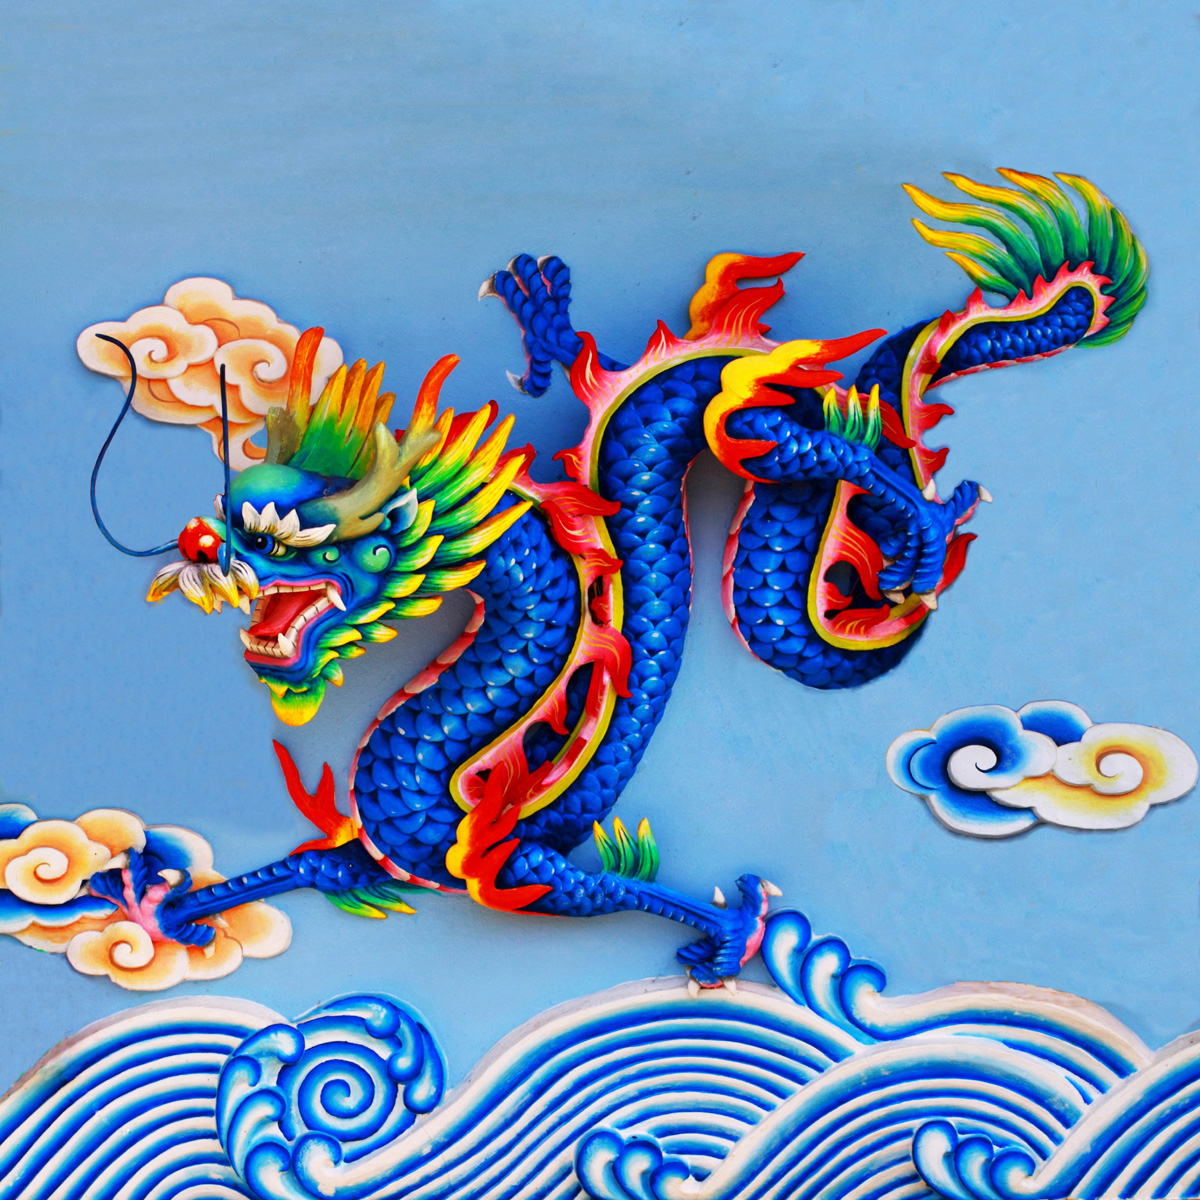 Chinese dragon sculpture 29254 - Books and articles - Classical ...